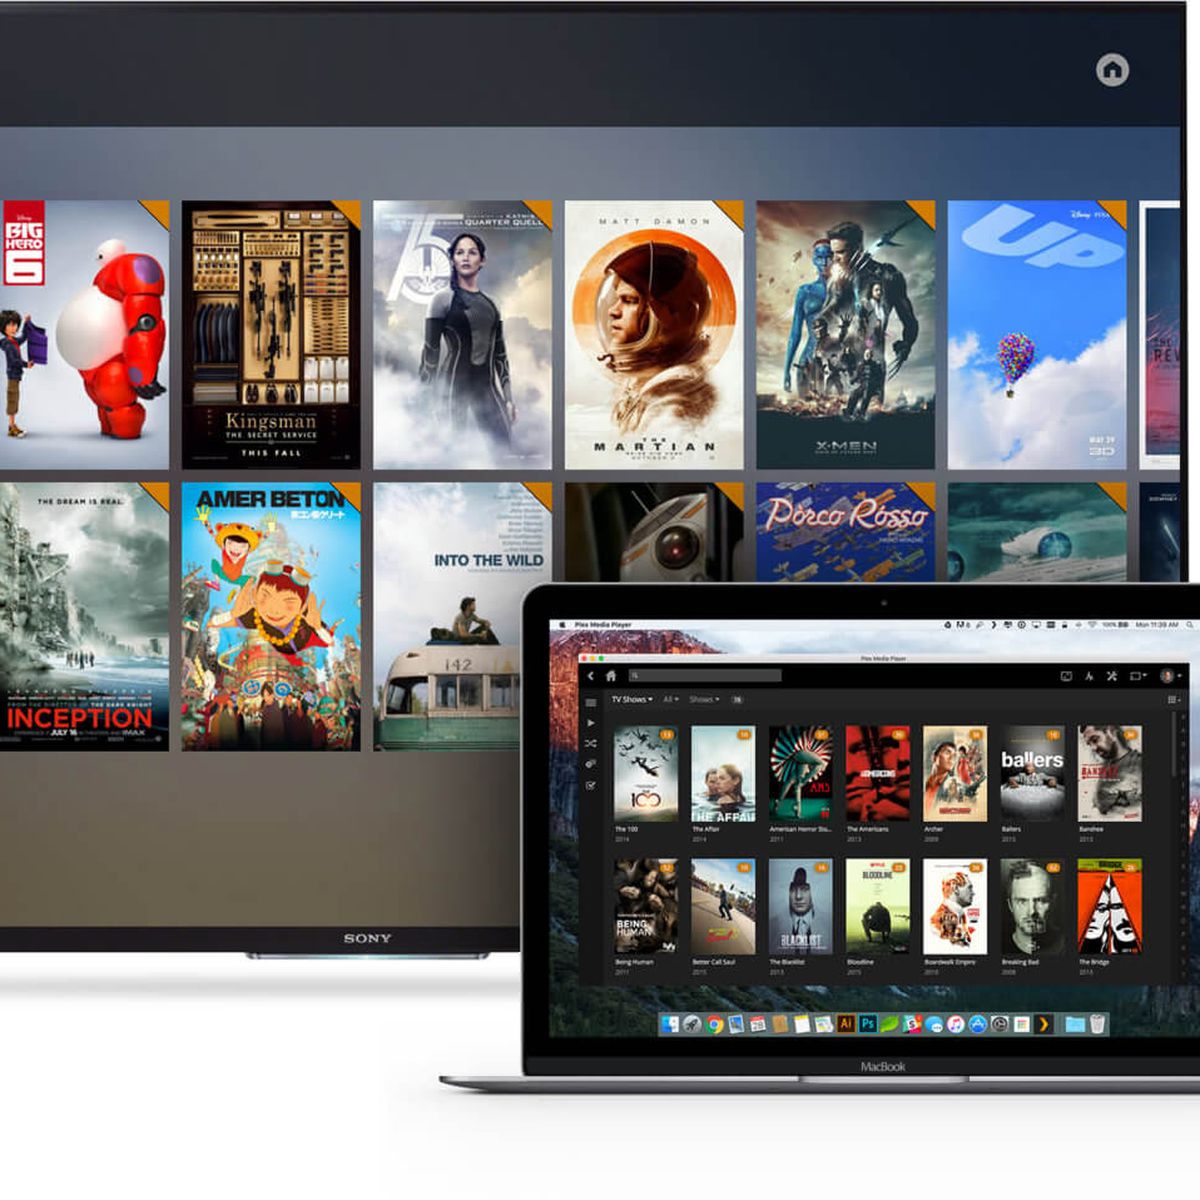 Plex Media Player for Mac Now a Free Download for All Users - MacRumors